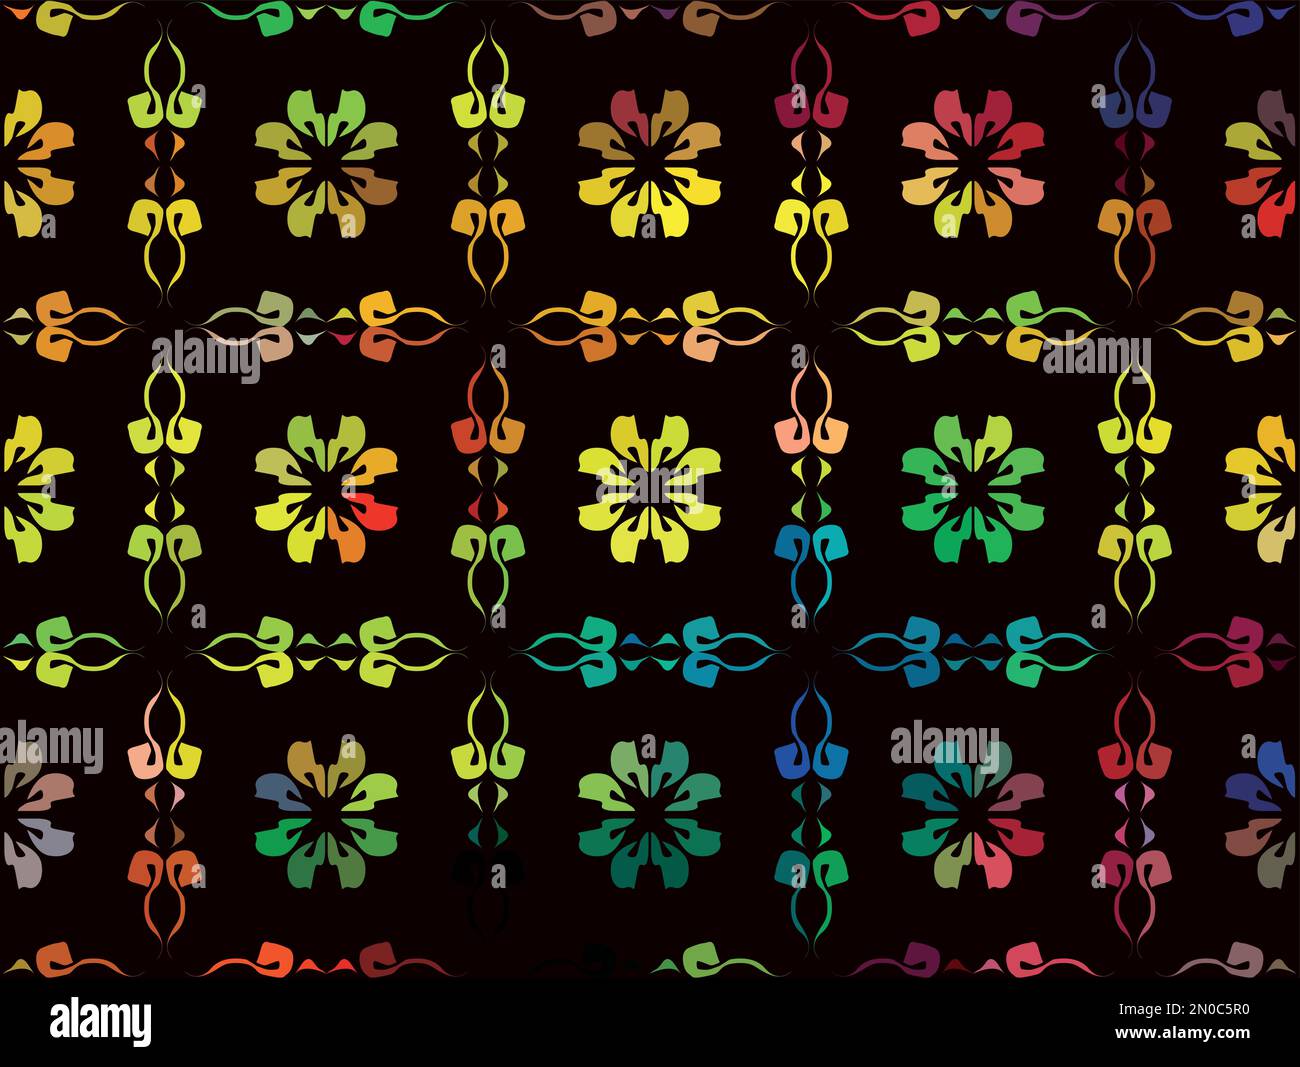 Motifs flowers Stock Vector Images - Alamy